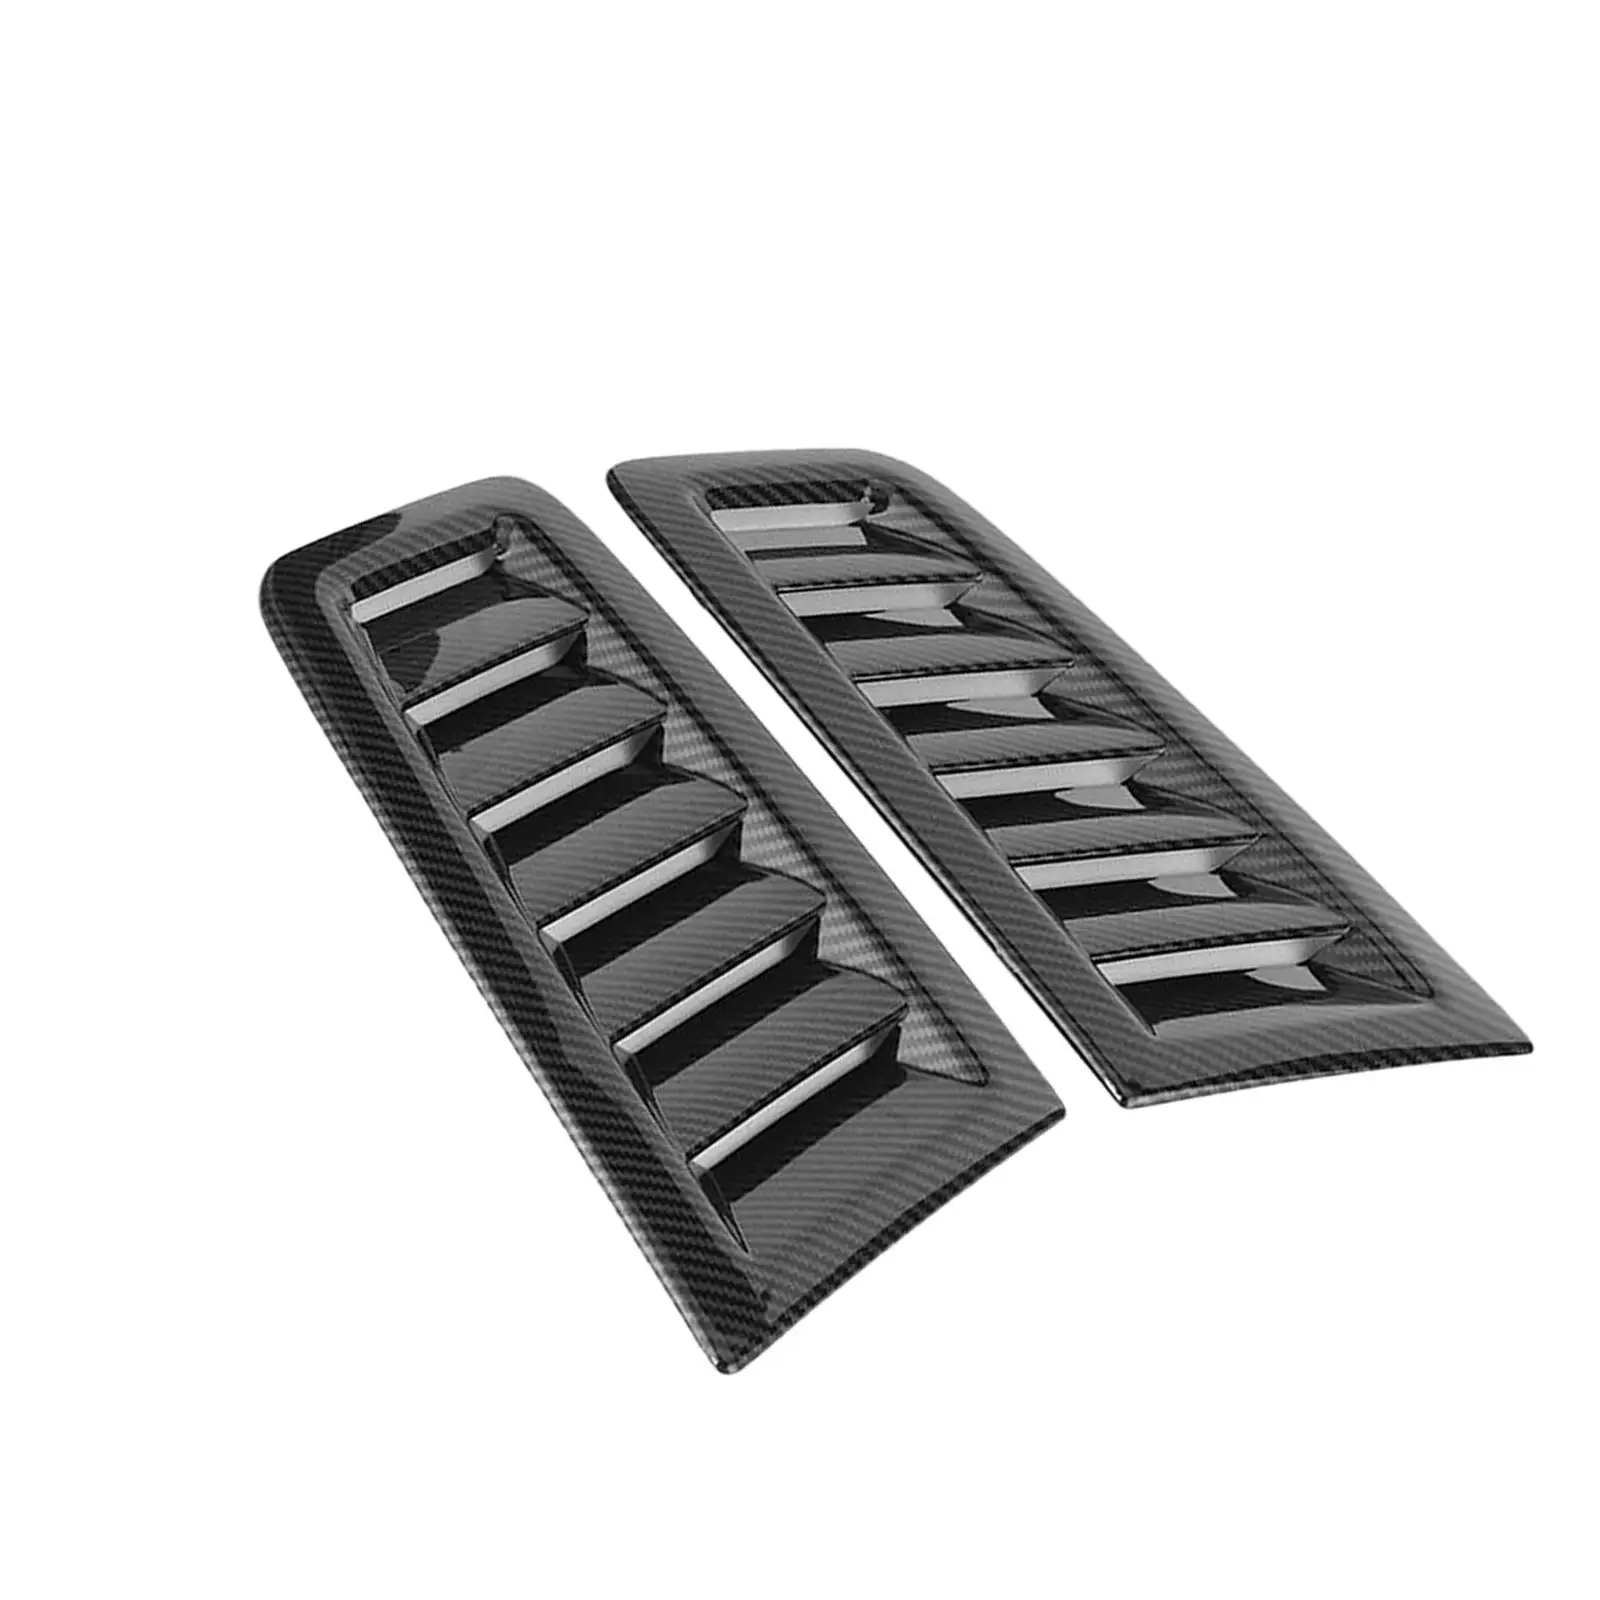 2 Pieces Car Hood Vent Scoops Exterior Parts High Quality Air Intake Hood Vents